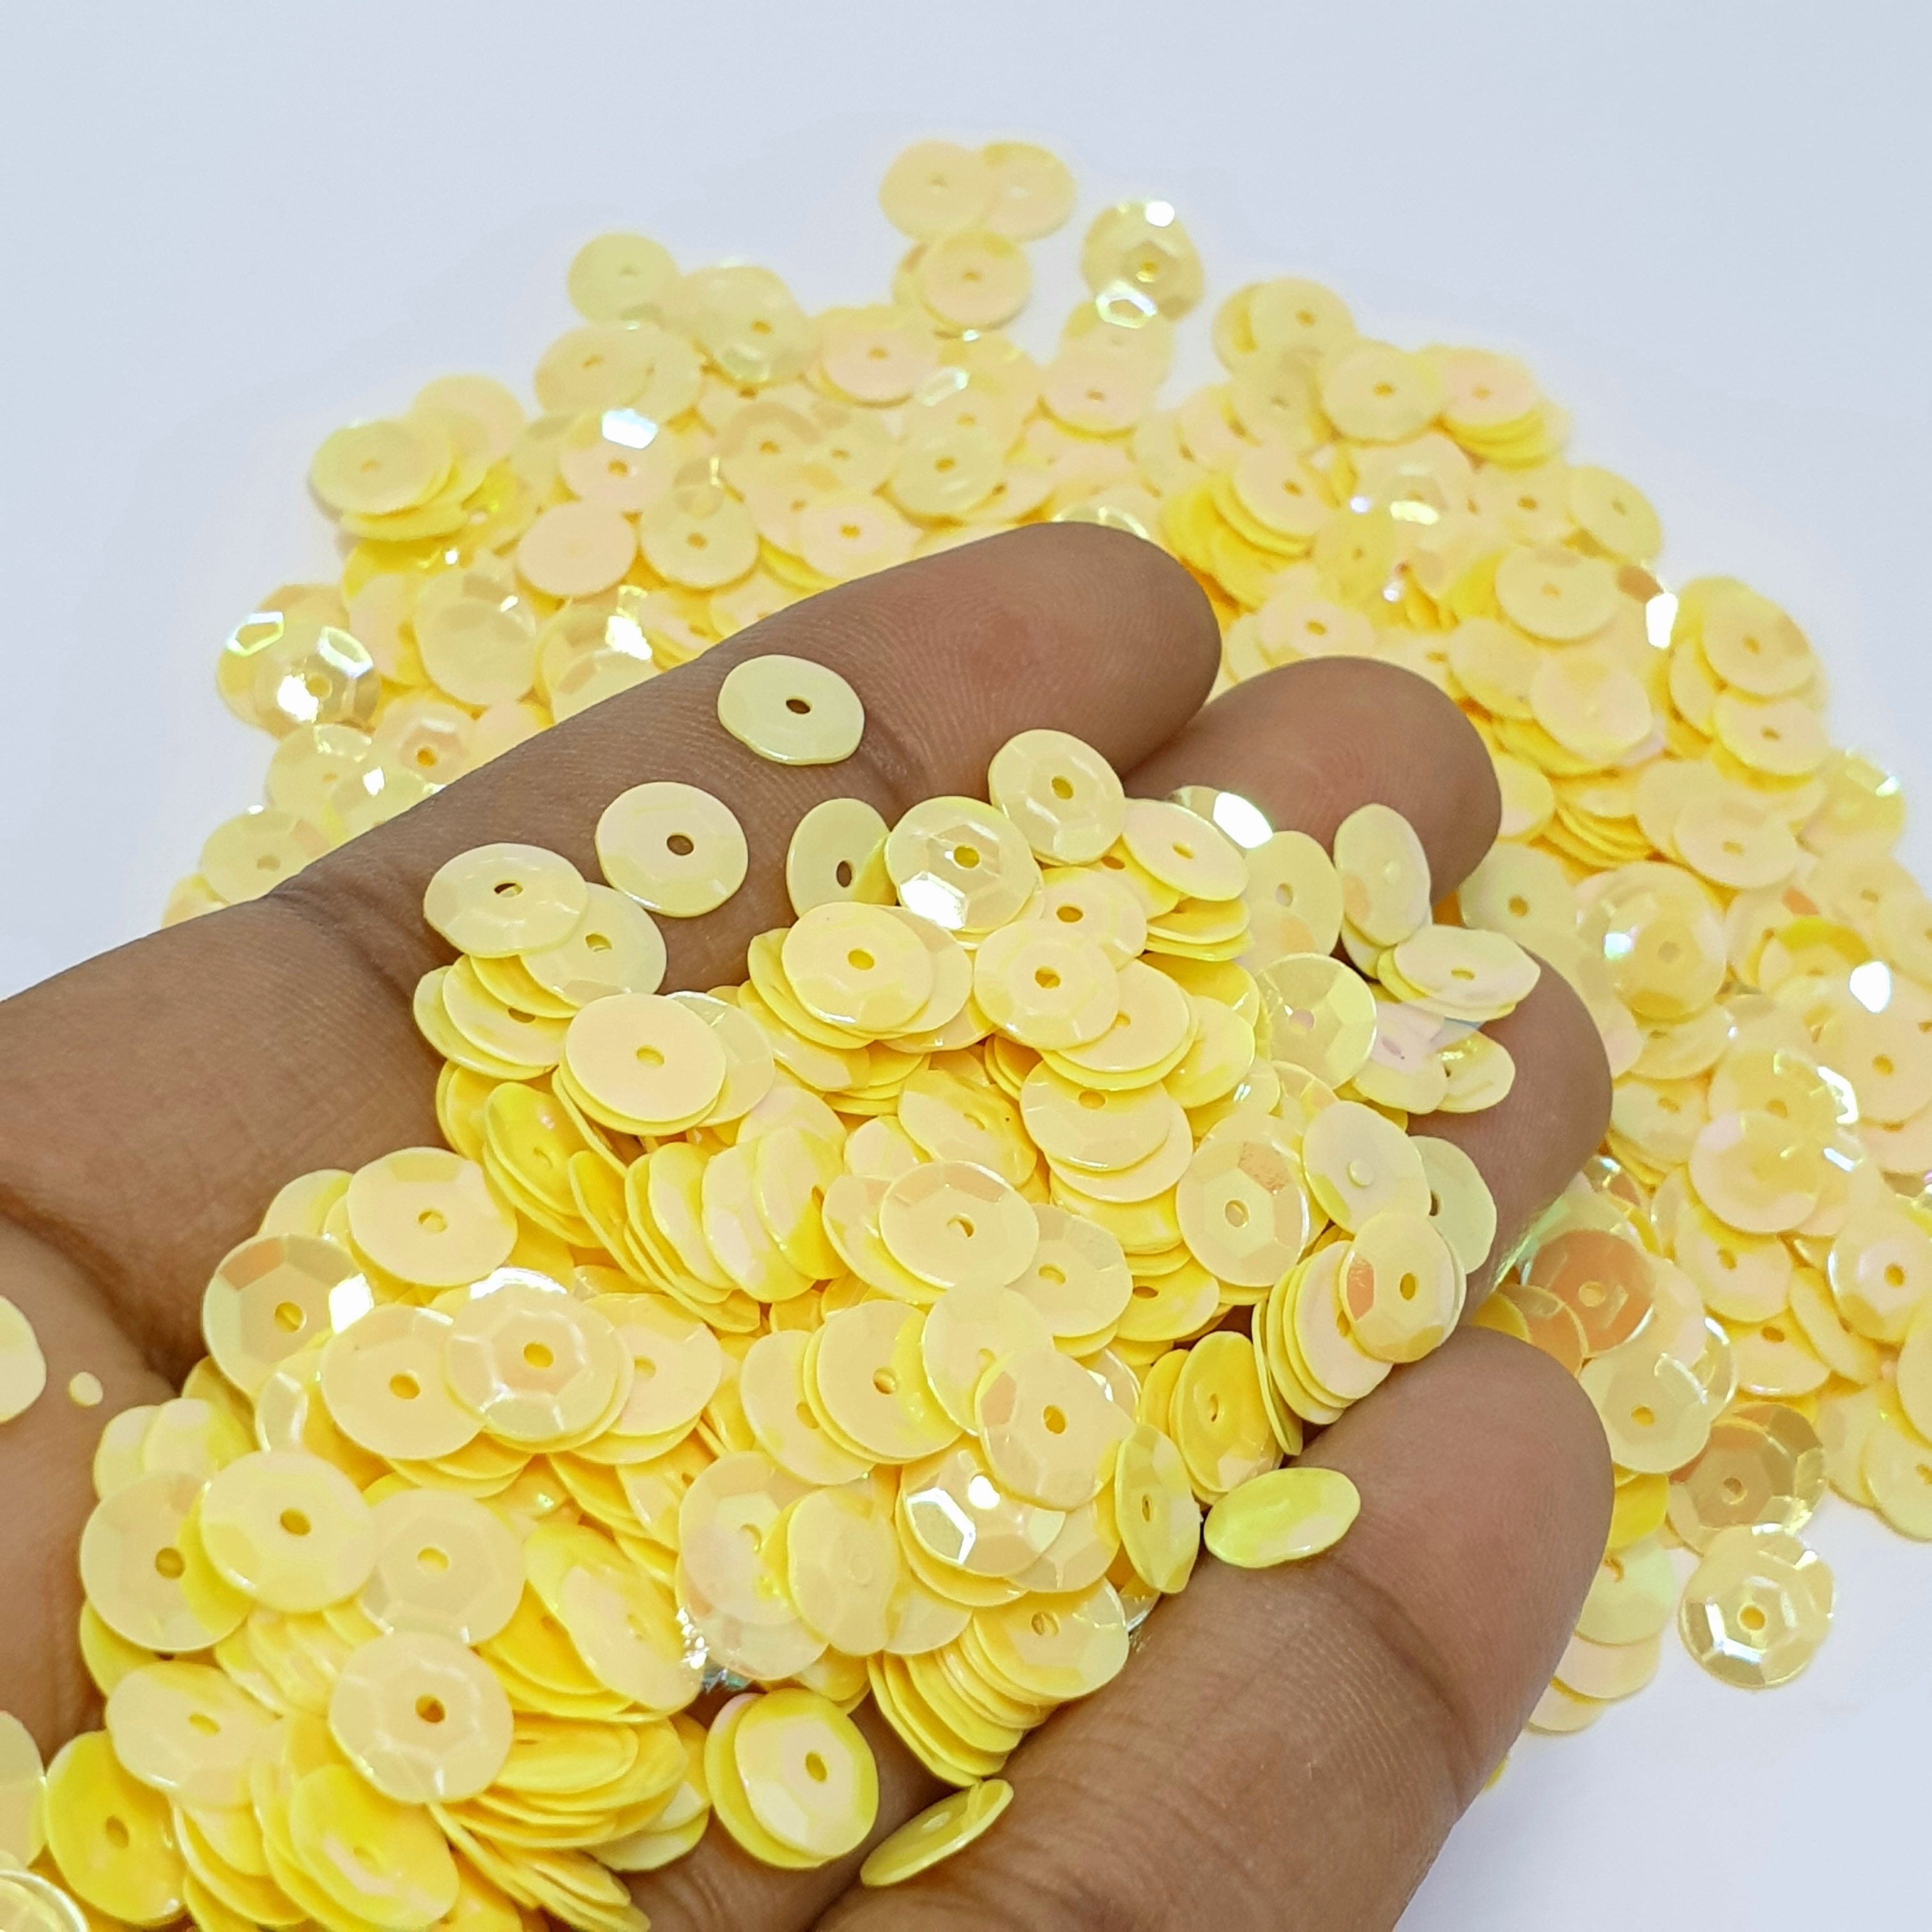 MajorCrafts 50grams 6mm Yellow AB Round Sew-On Cup Sequins